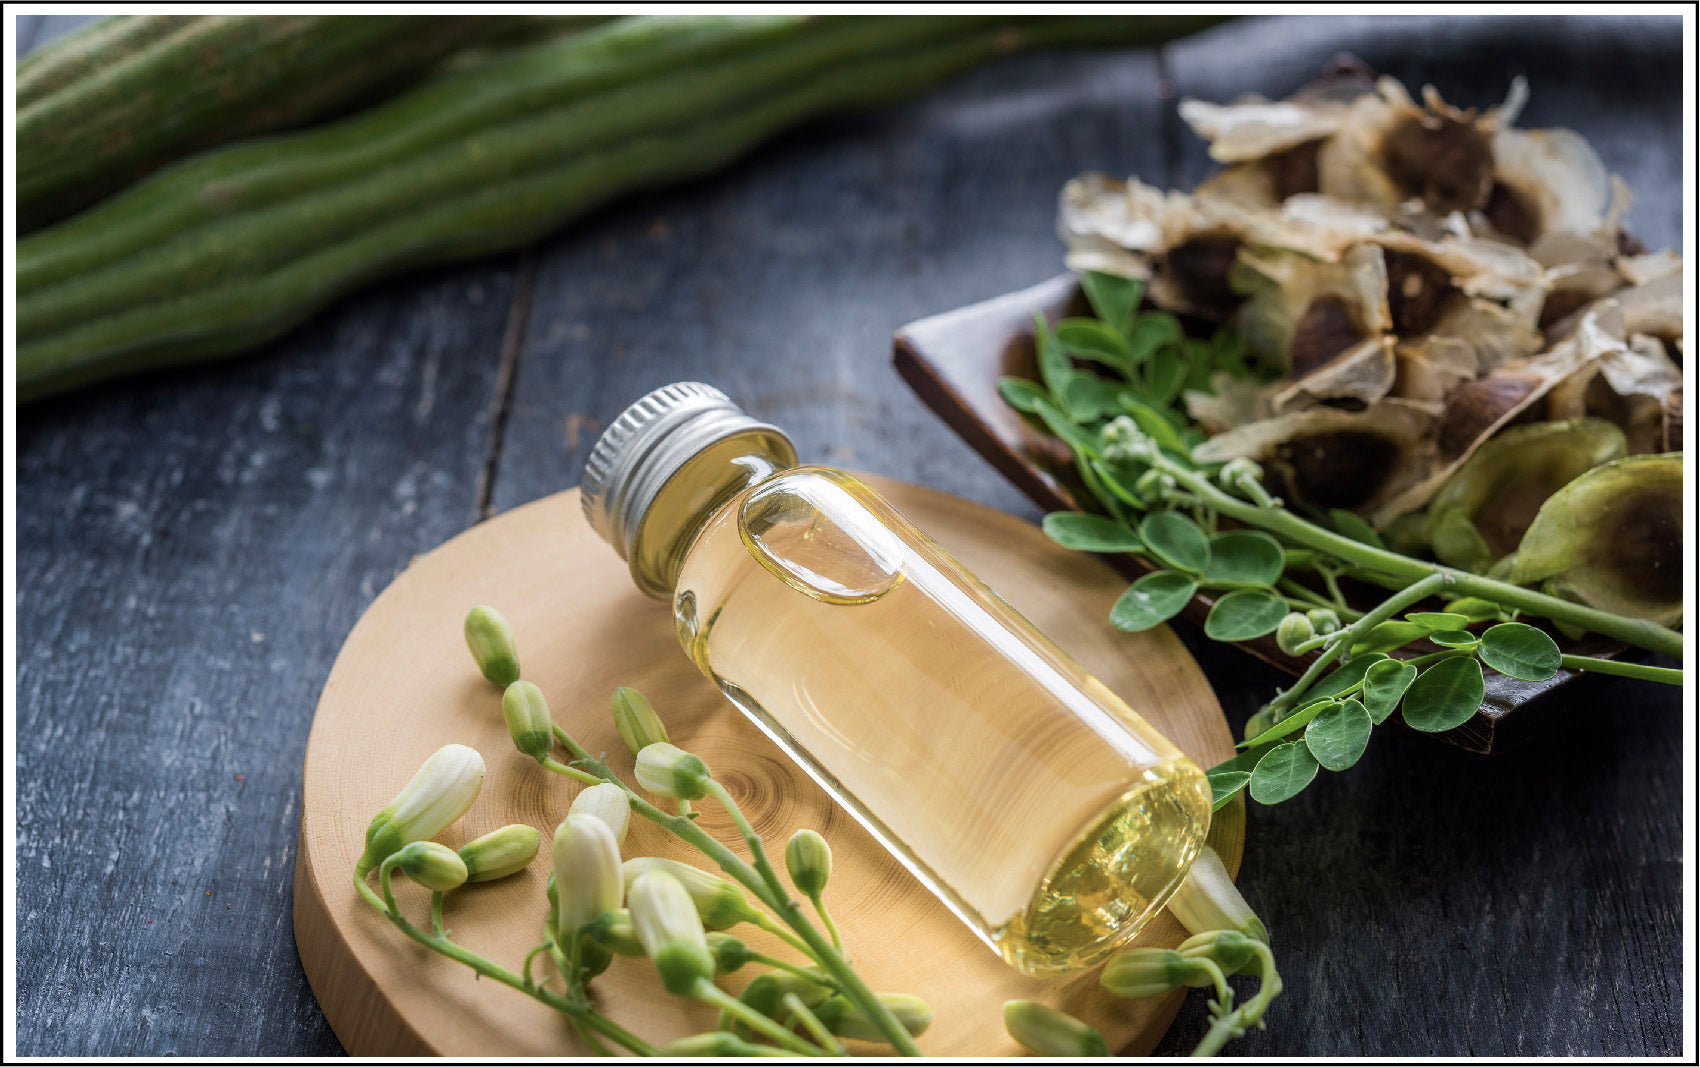 Moringa Oil Can Bring Your Skin Health, Nourishment, And A More Youthful Appearance.